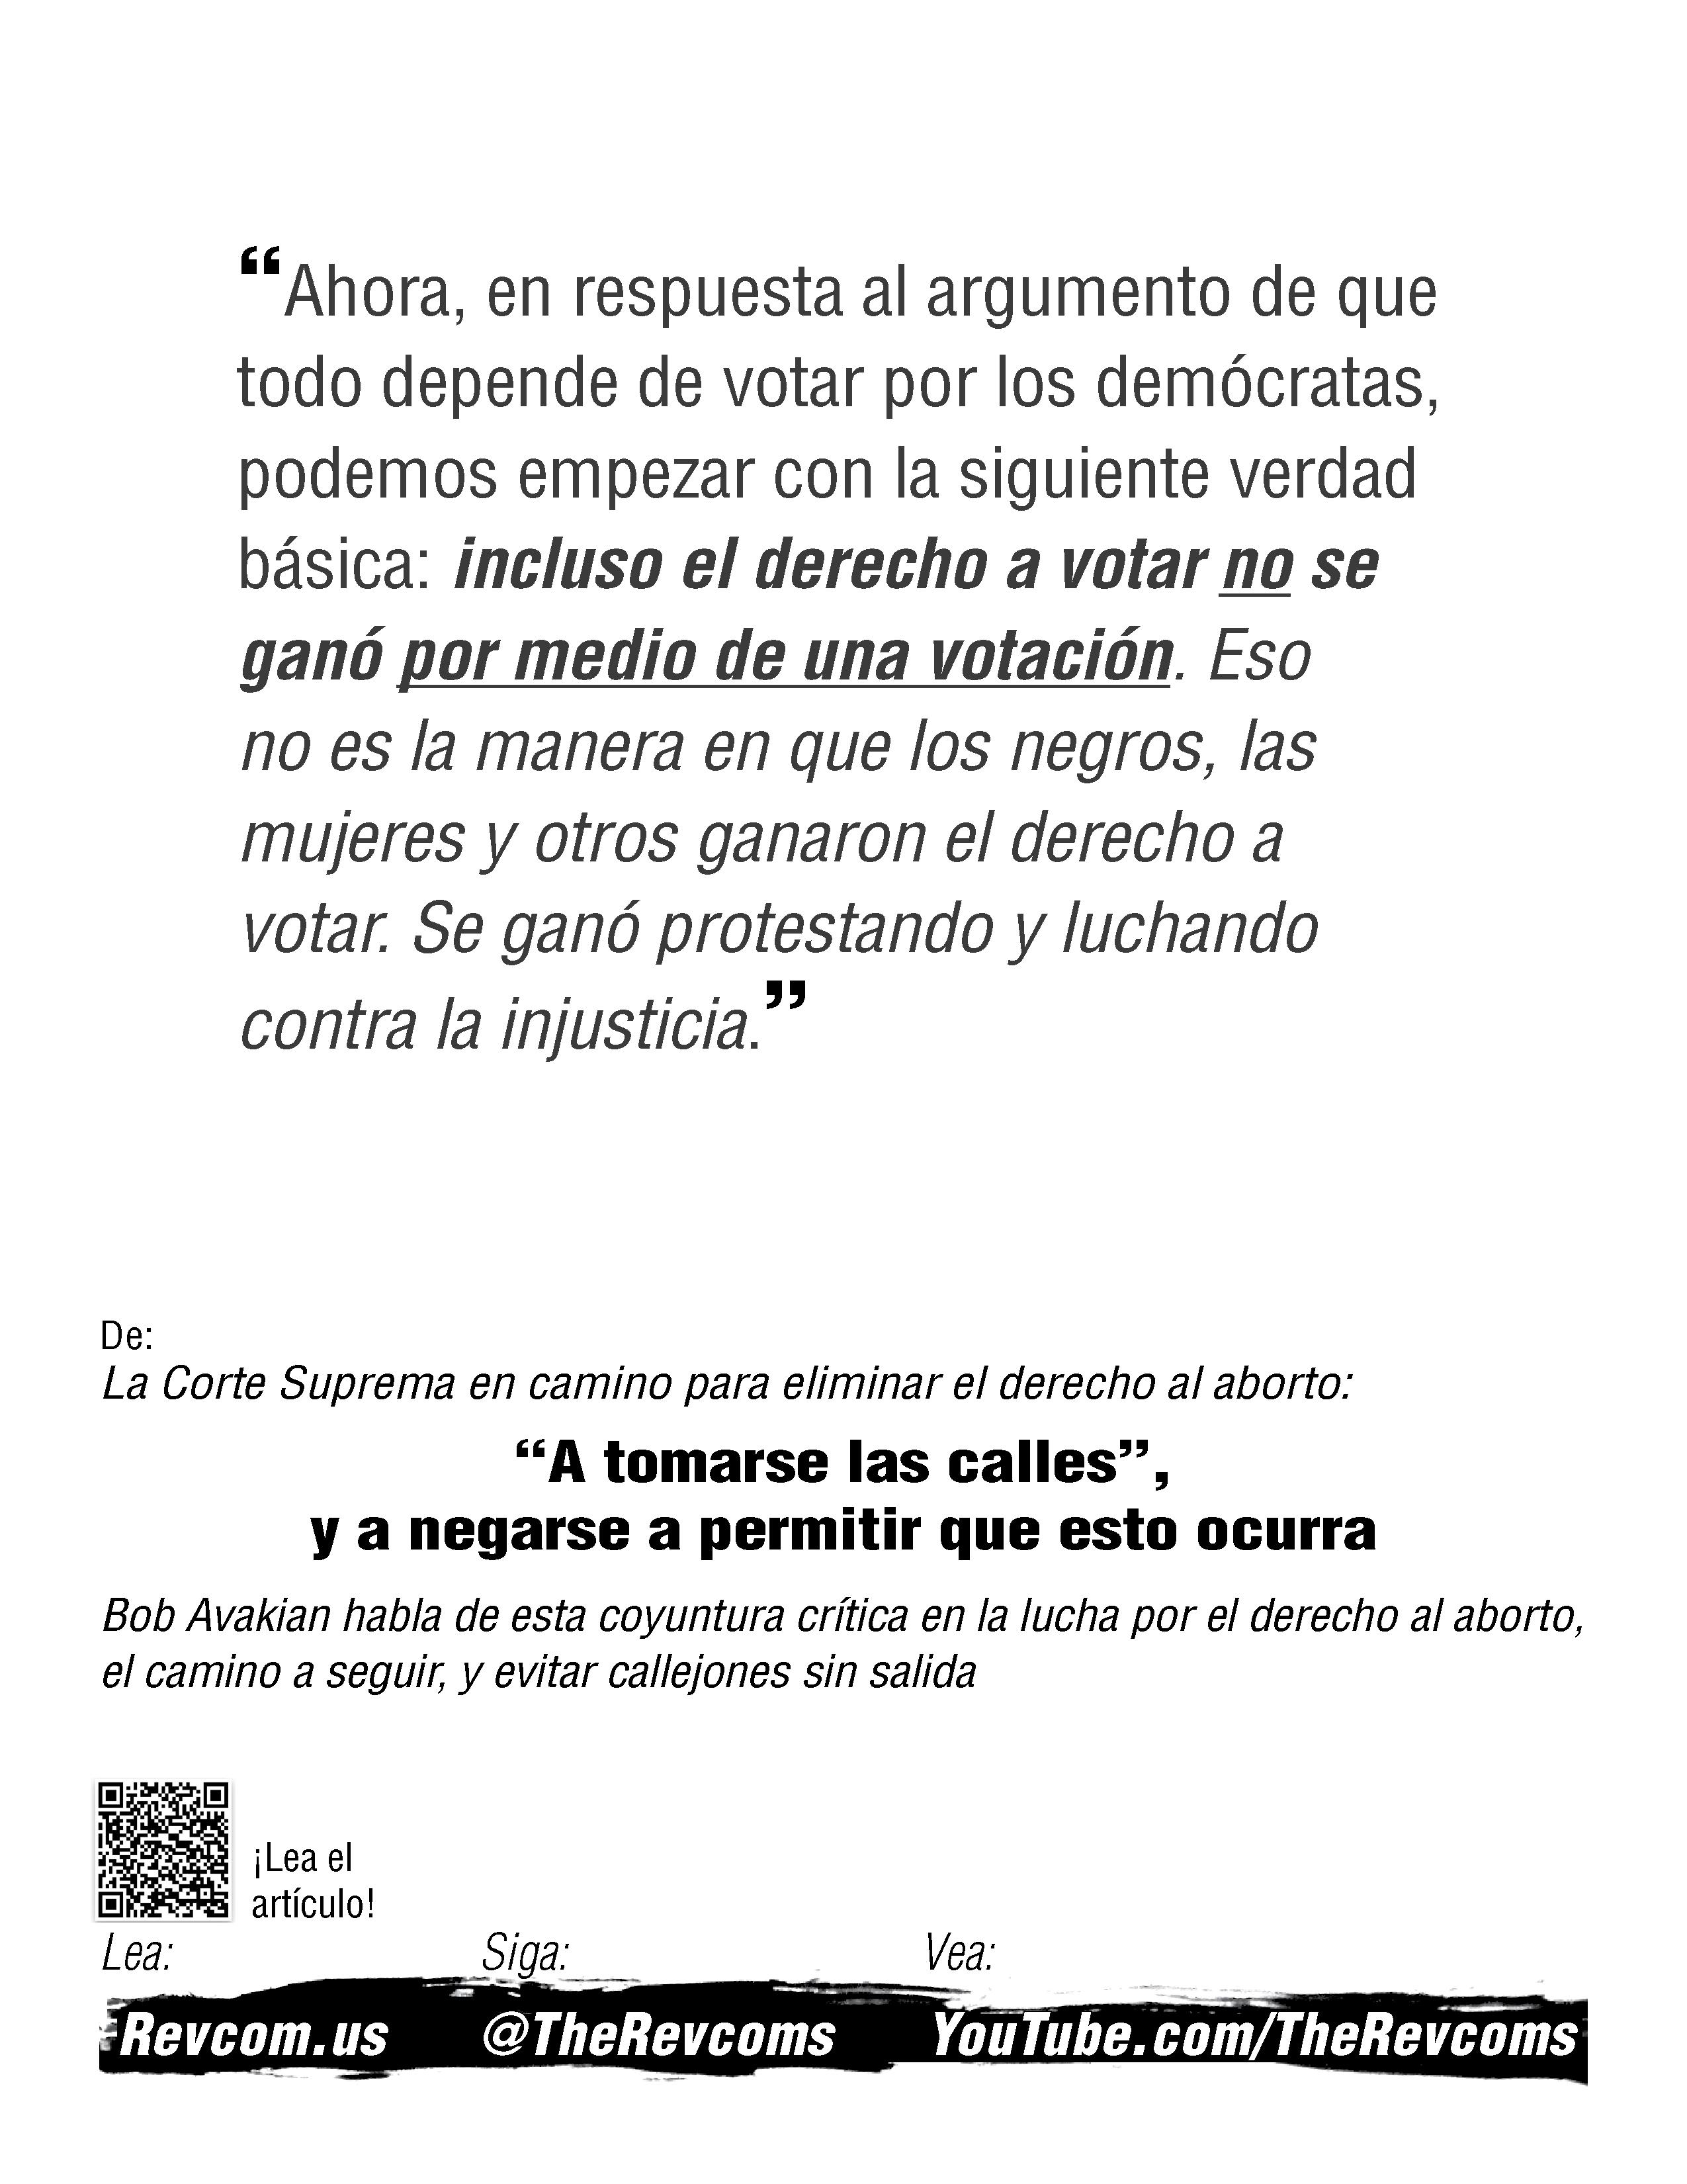 leaflet 4 quotes from BA  #4 spanish